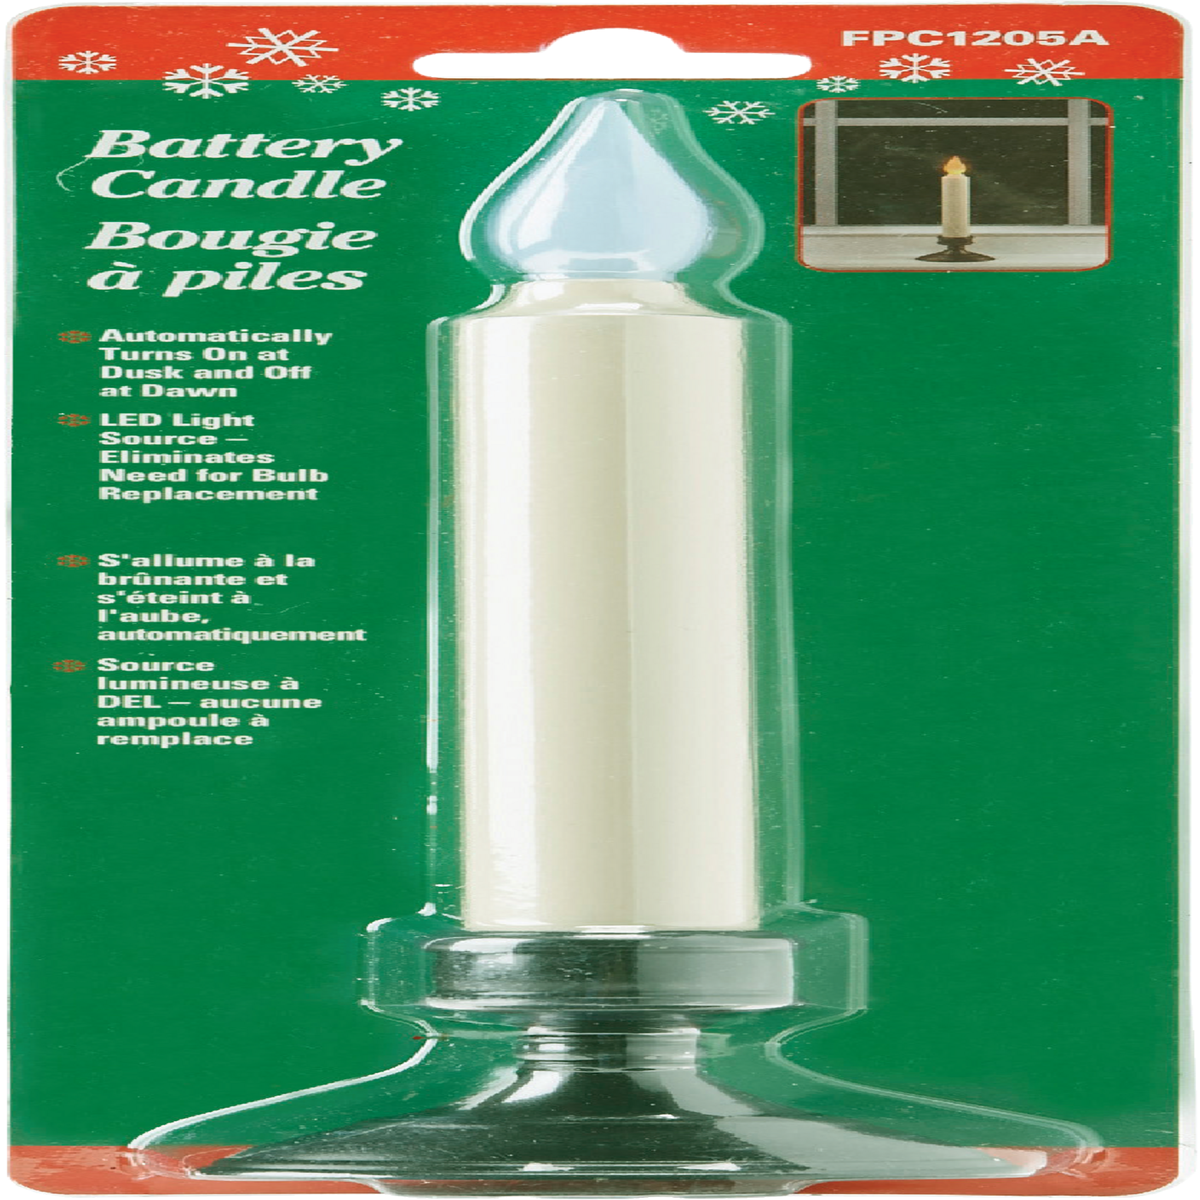 Battery Operated Candle